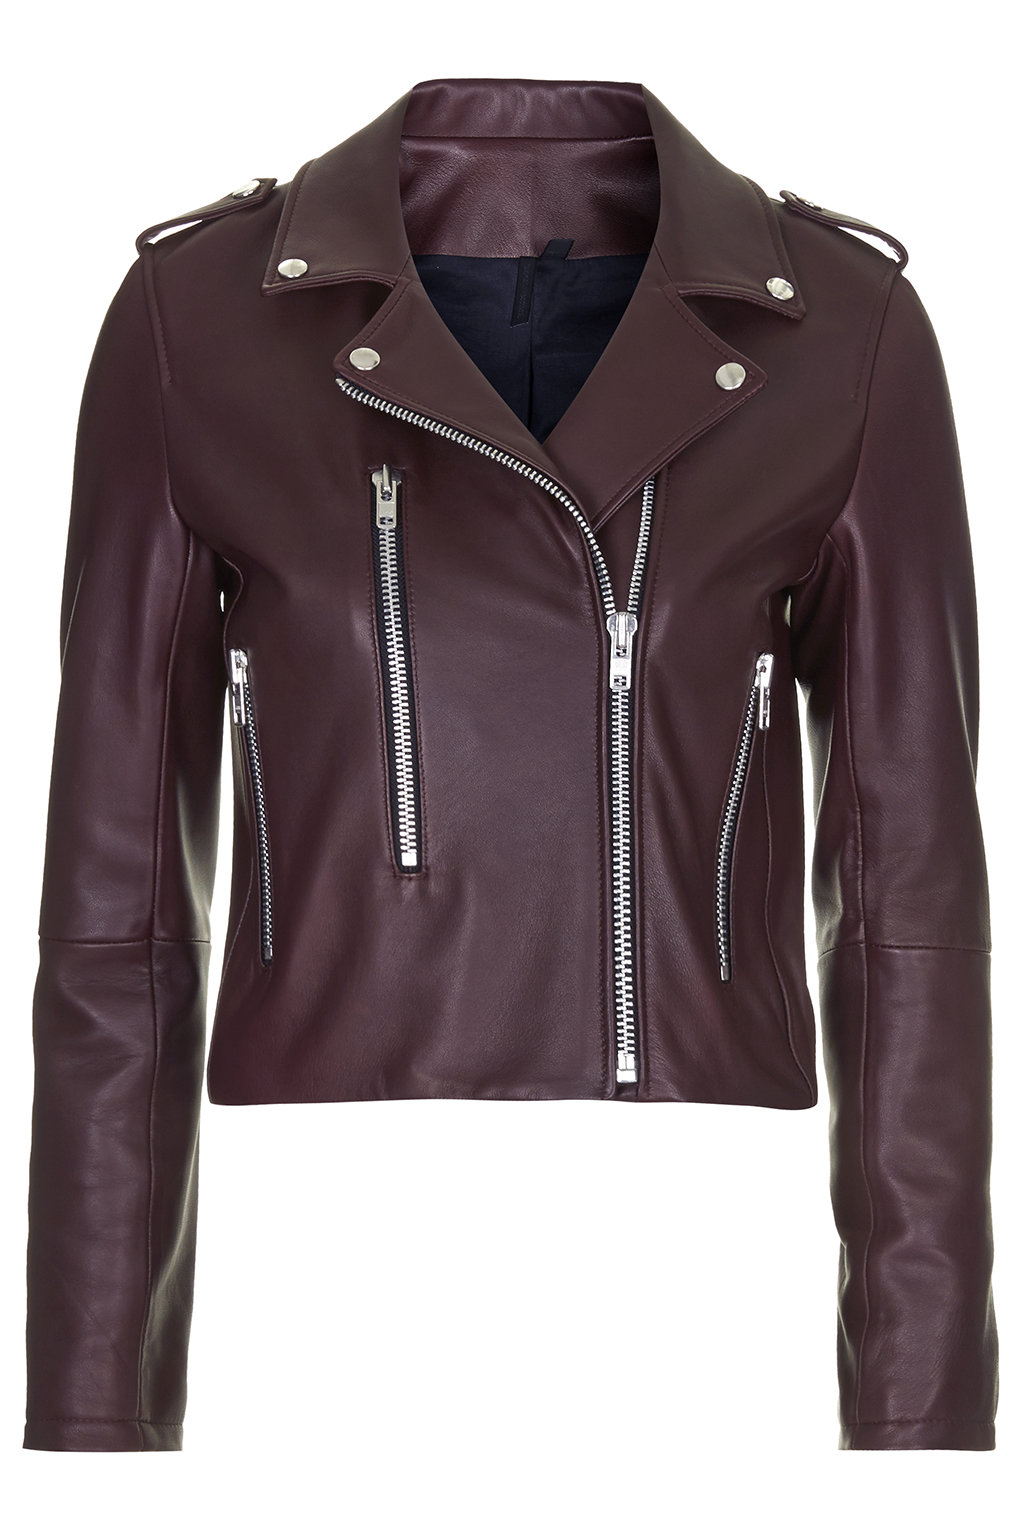 NEAT LEATHER BIKER JACKET BY BOUTIQUE